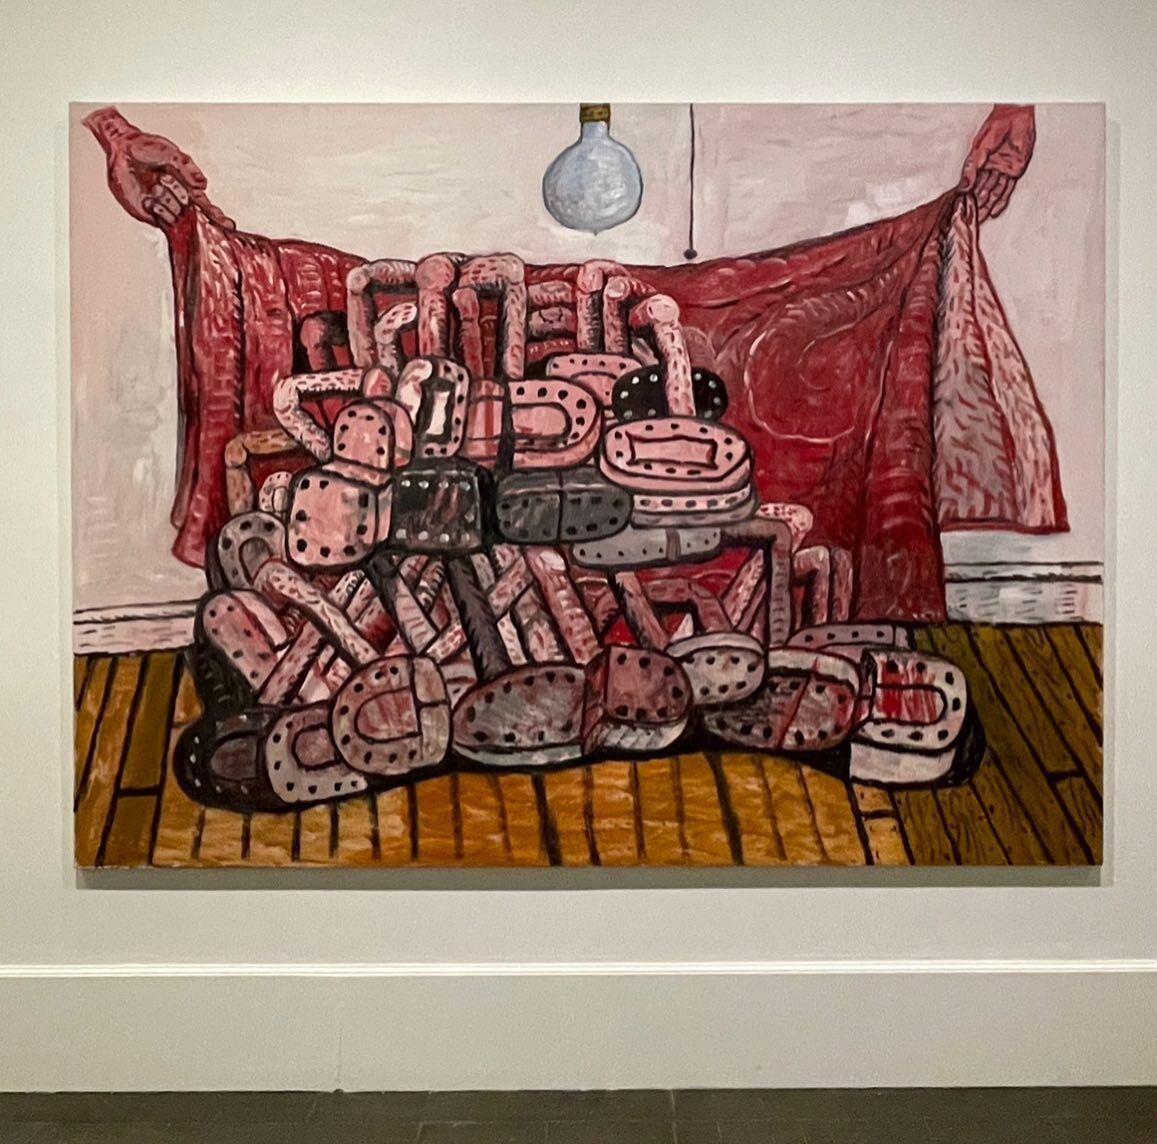 Philip Guston&rsquo;s &lsquo;Red Cloth,&rsquo; 1976, collection Brooklyn Museum⁣
⁣
#philipguston @brooklynmuseum #brooklynmuseum #redcloth #modicacarr #modicacarrartadvisory